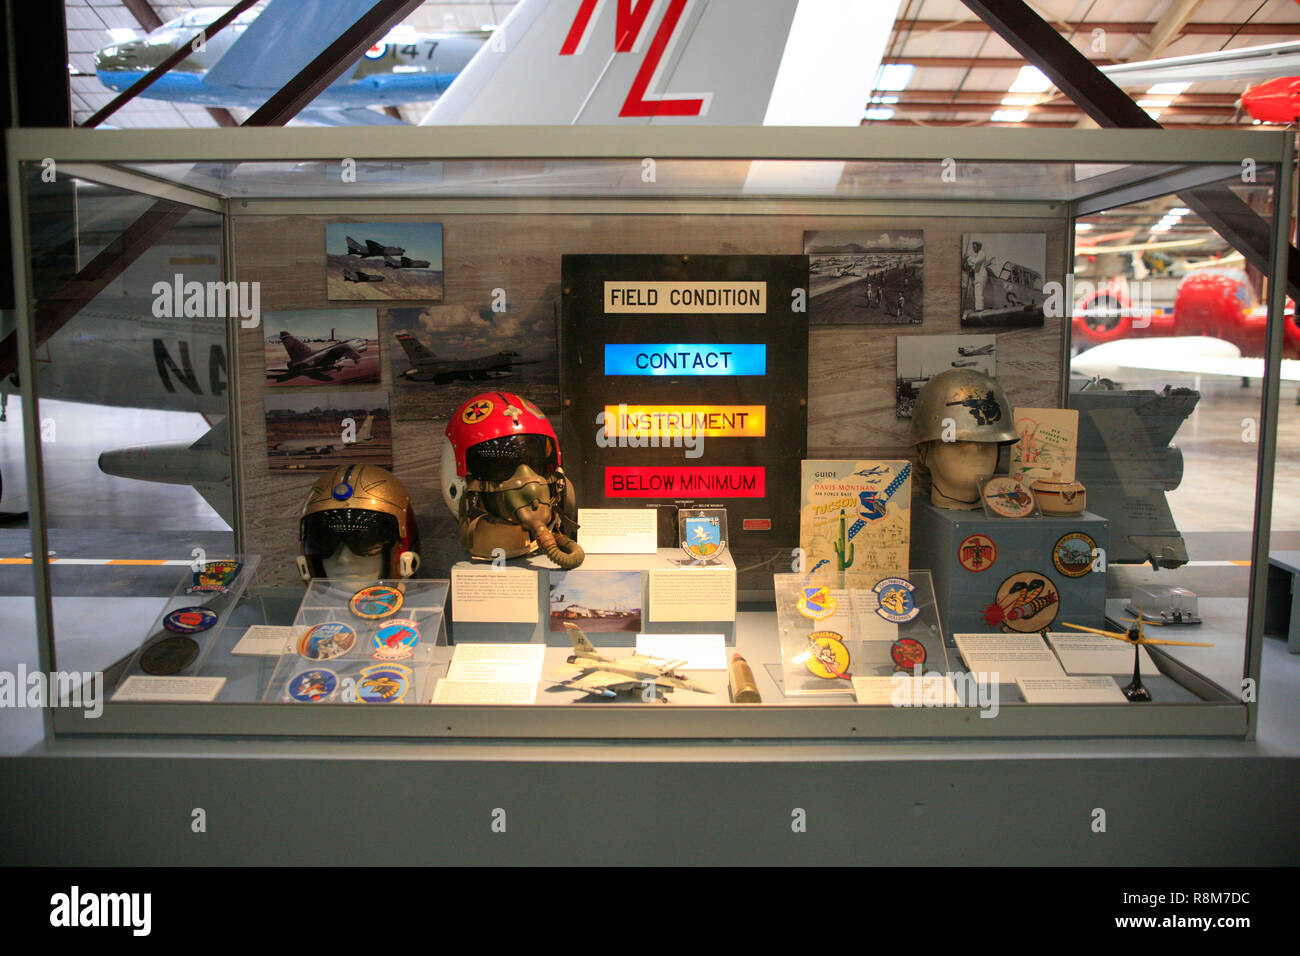 Display of USAF apparel related to the Davis-MonthanAir Force base on display at the Pima Air & Space Museum in Tucson, AZ Stock Photo